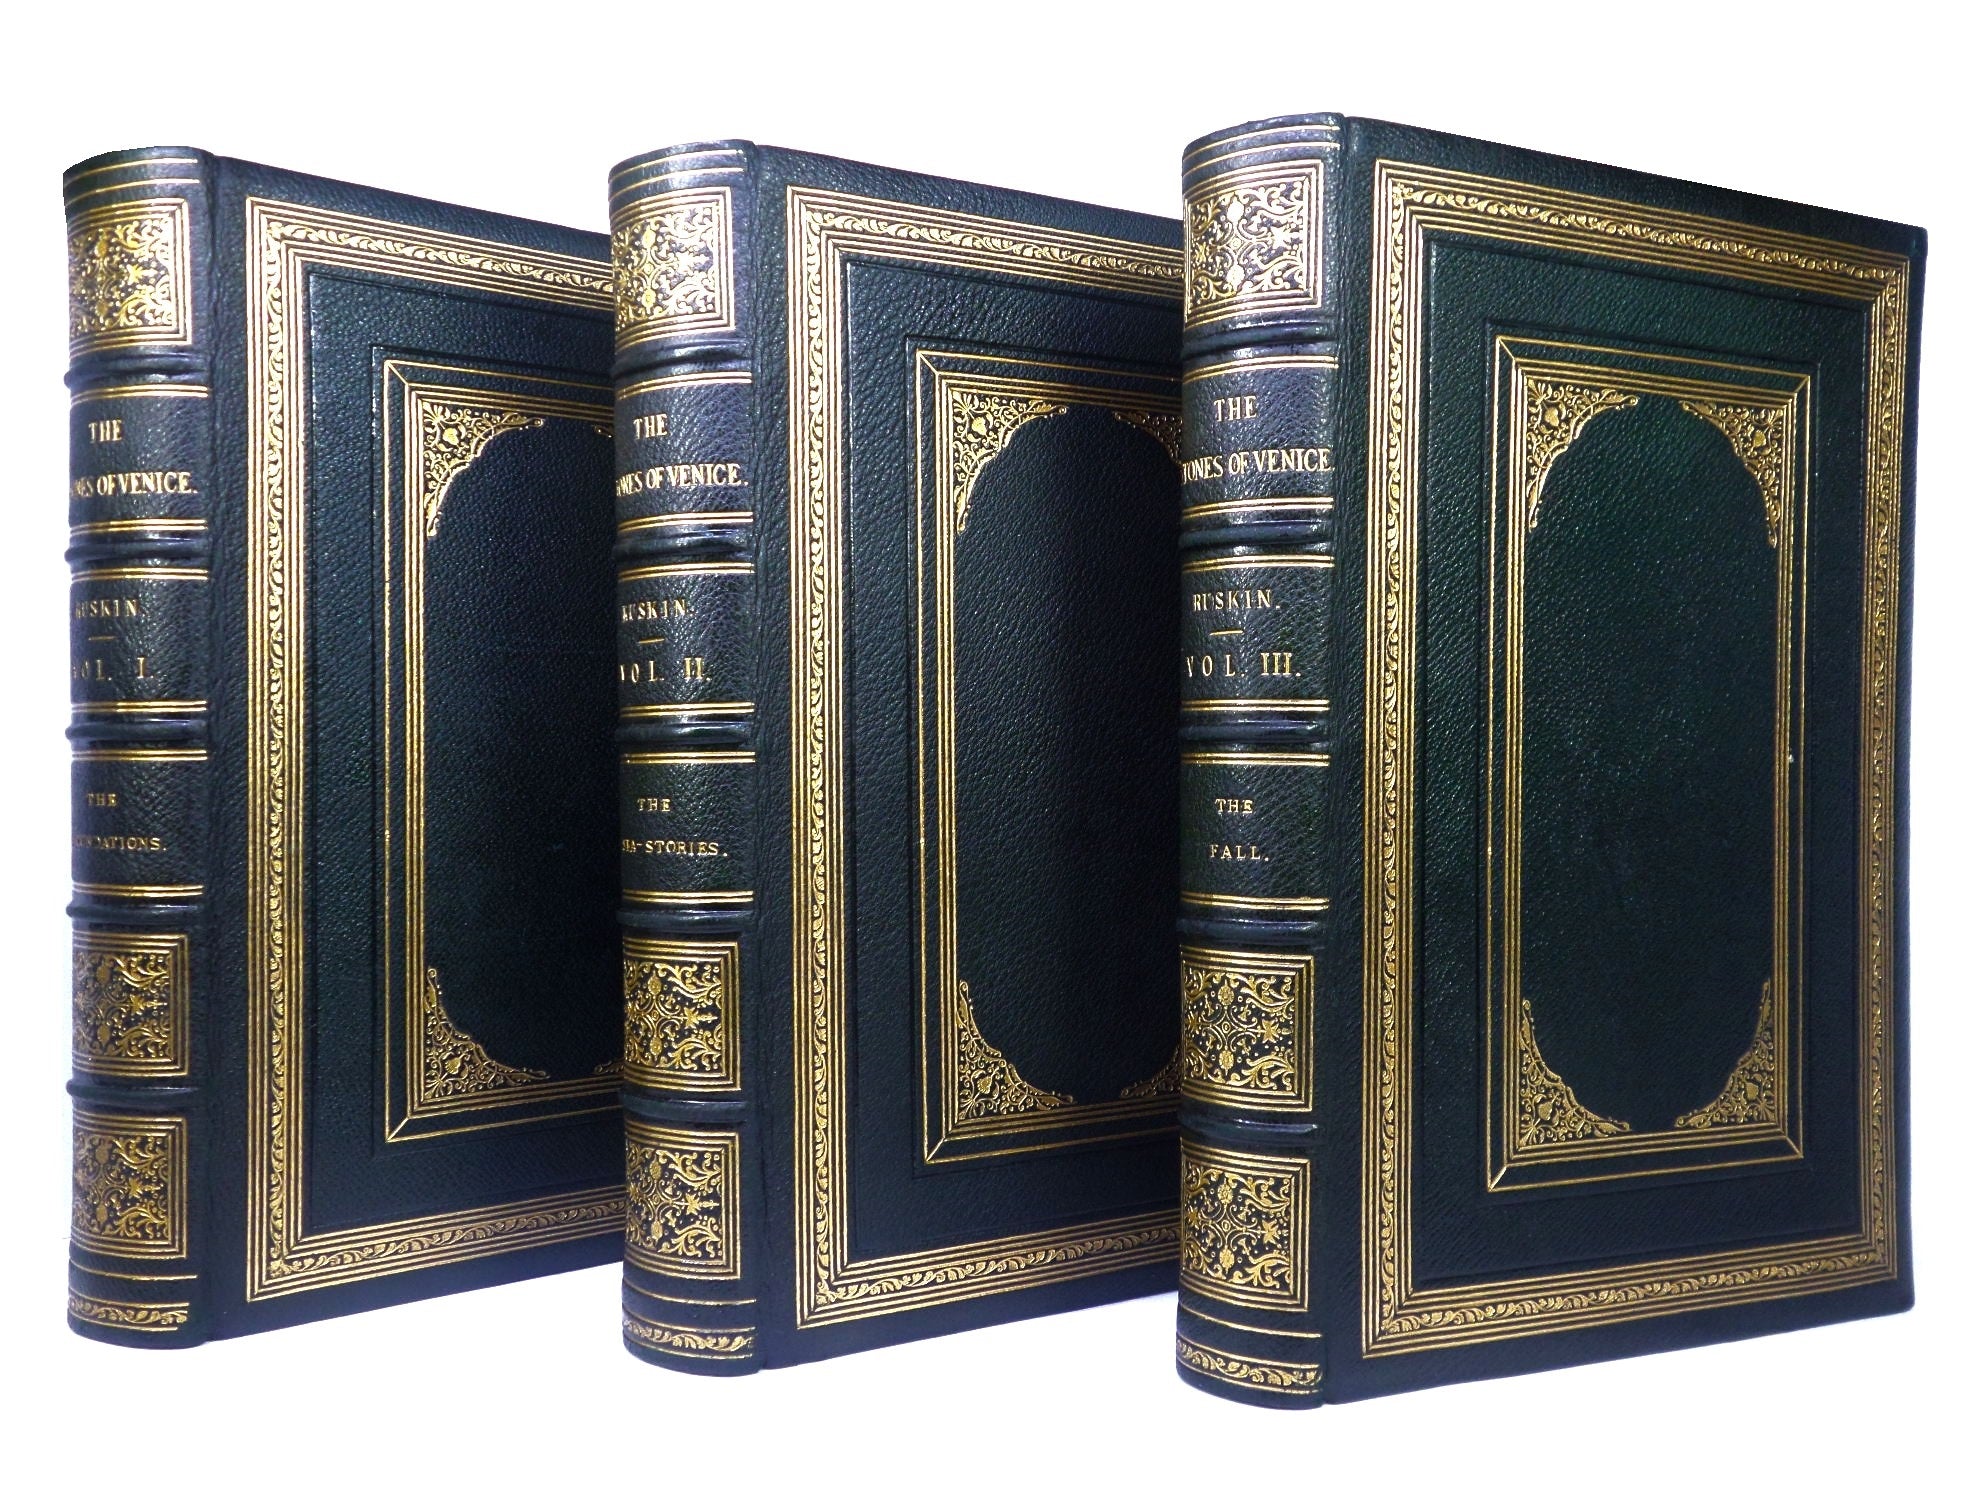 THE STONES OF VENICE 1873-74 JOHN RUSKIN SIGNED LIMITED EDITION, LEATHER BOUND